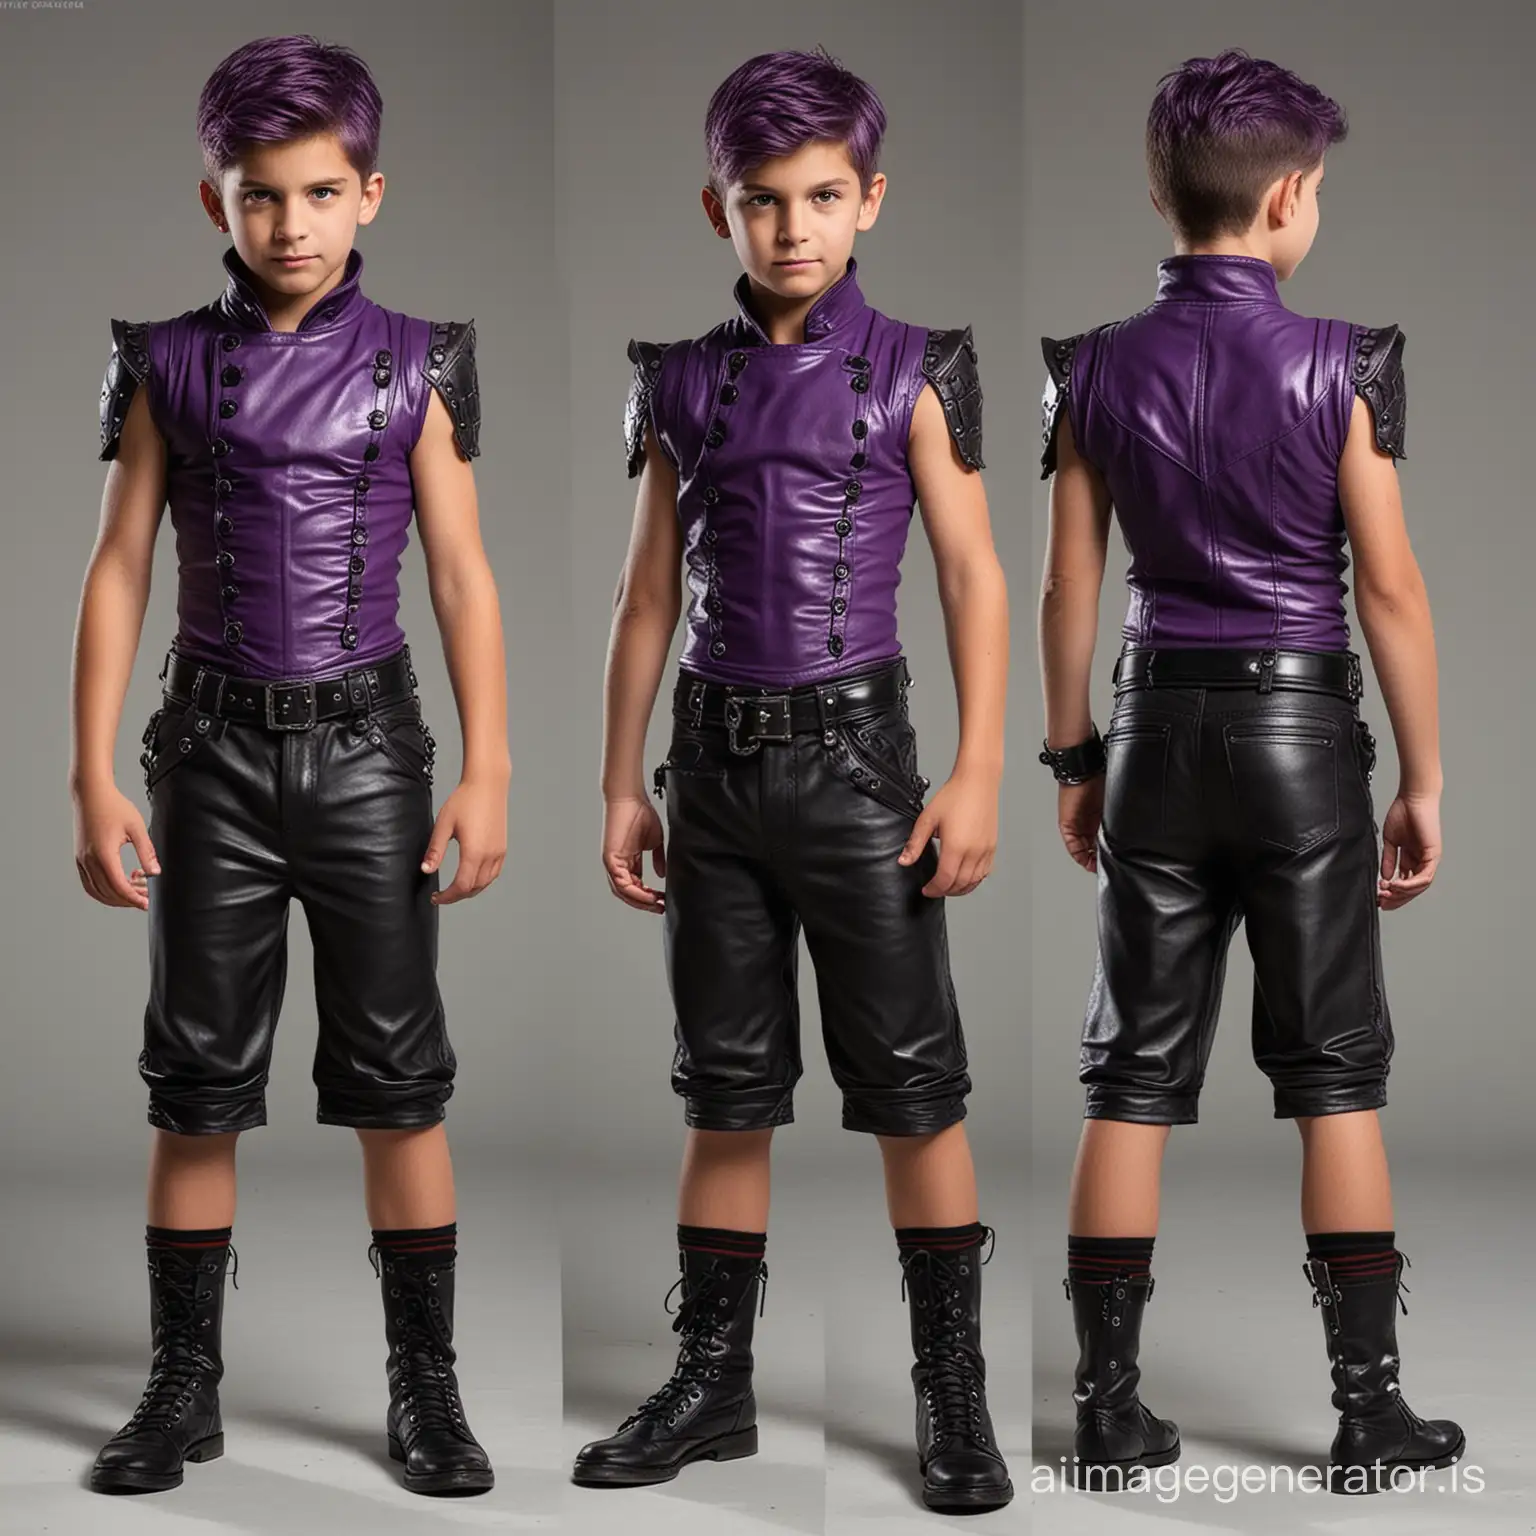 Create a villain outfit for a strong 8 year old boy villain with abs, cool,  wicked, leather,  shorts,  comfortable yet intimidating, various shades of purple with hints of both red, and green